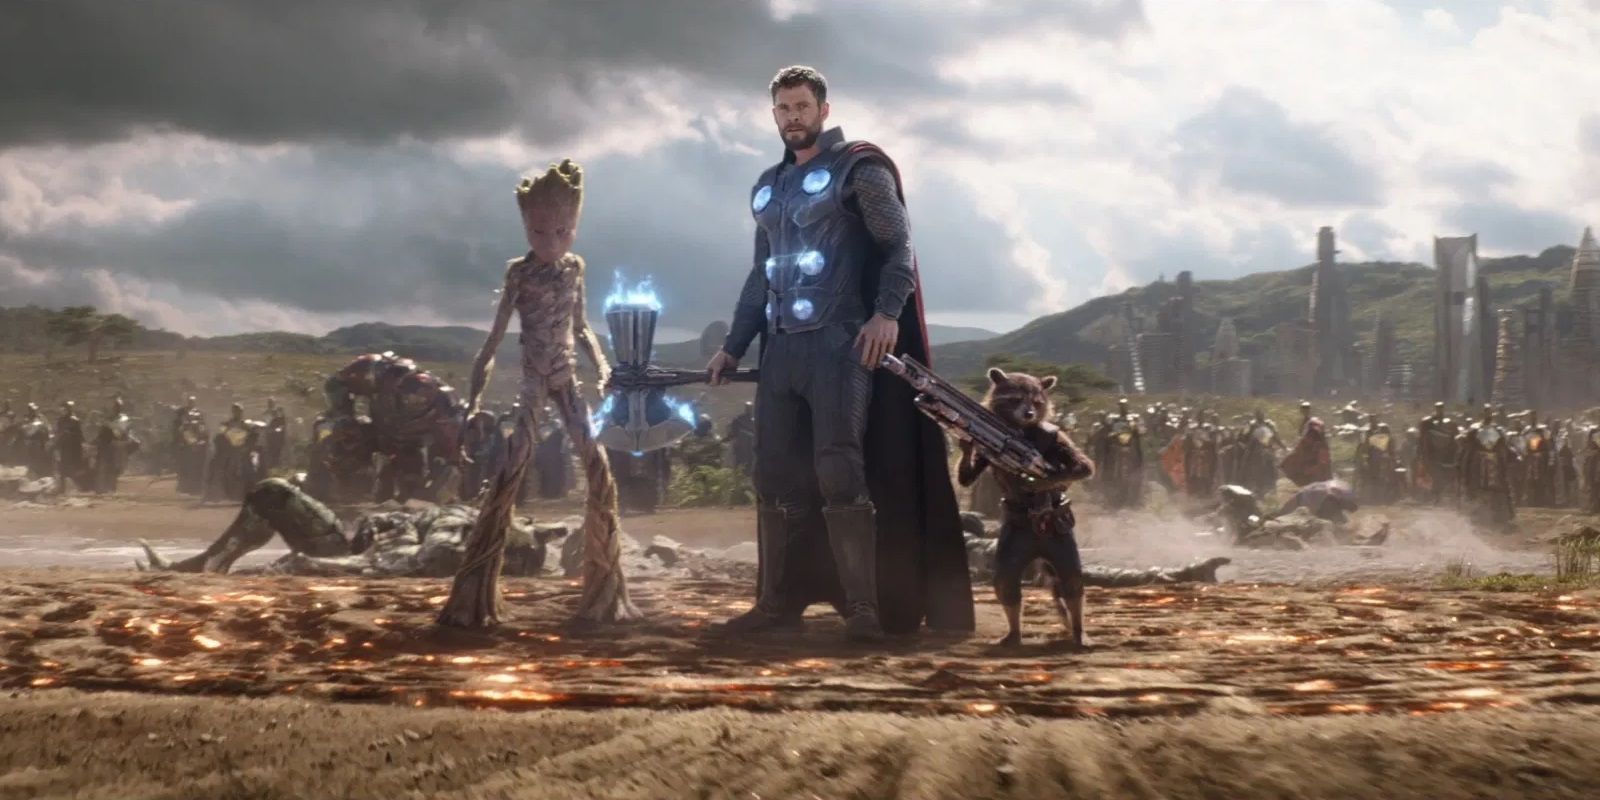 Thor Rocket and Groot in Avengers Infinity War